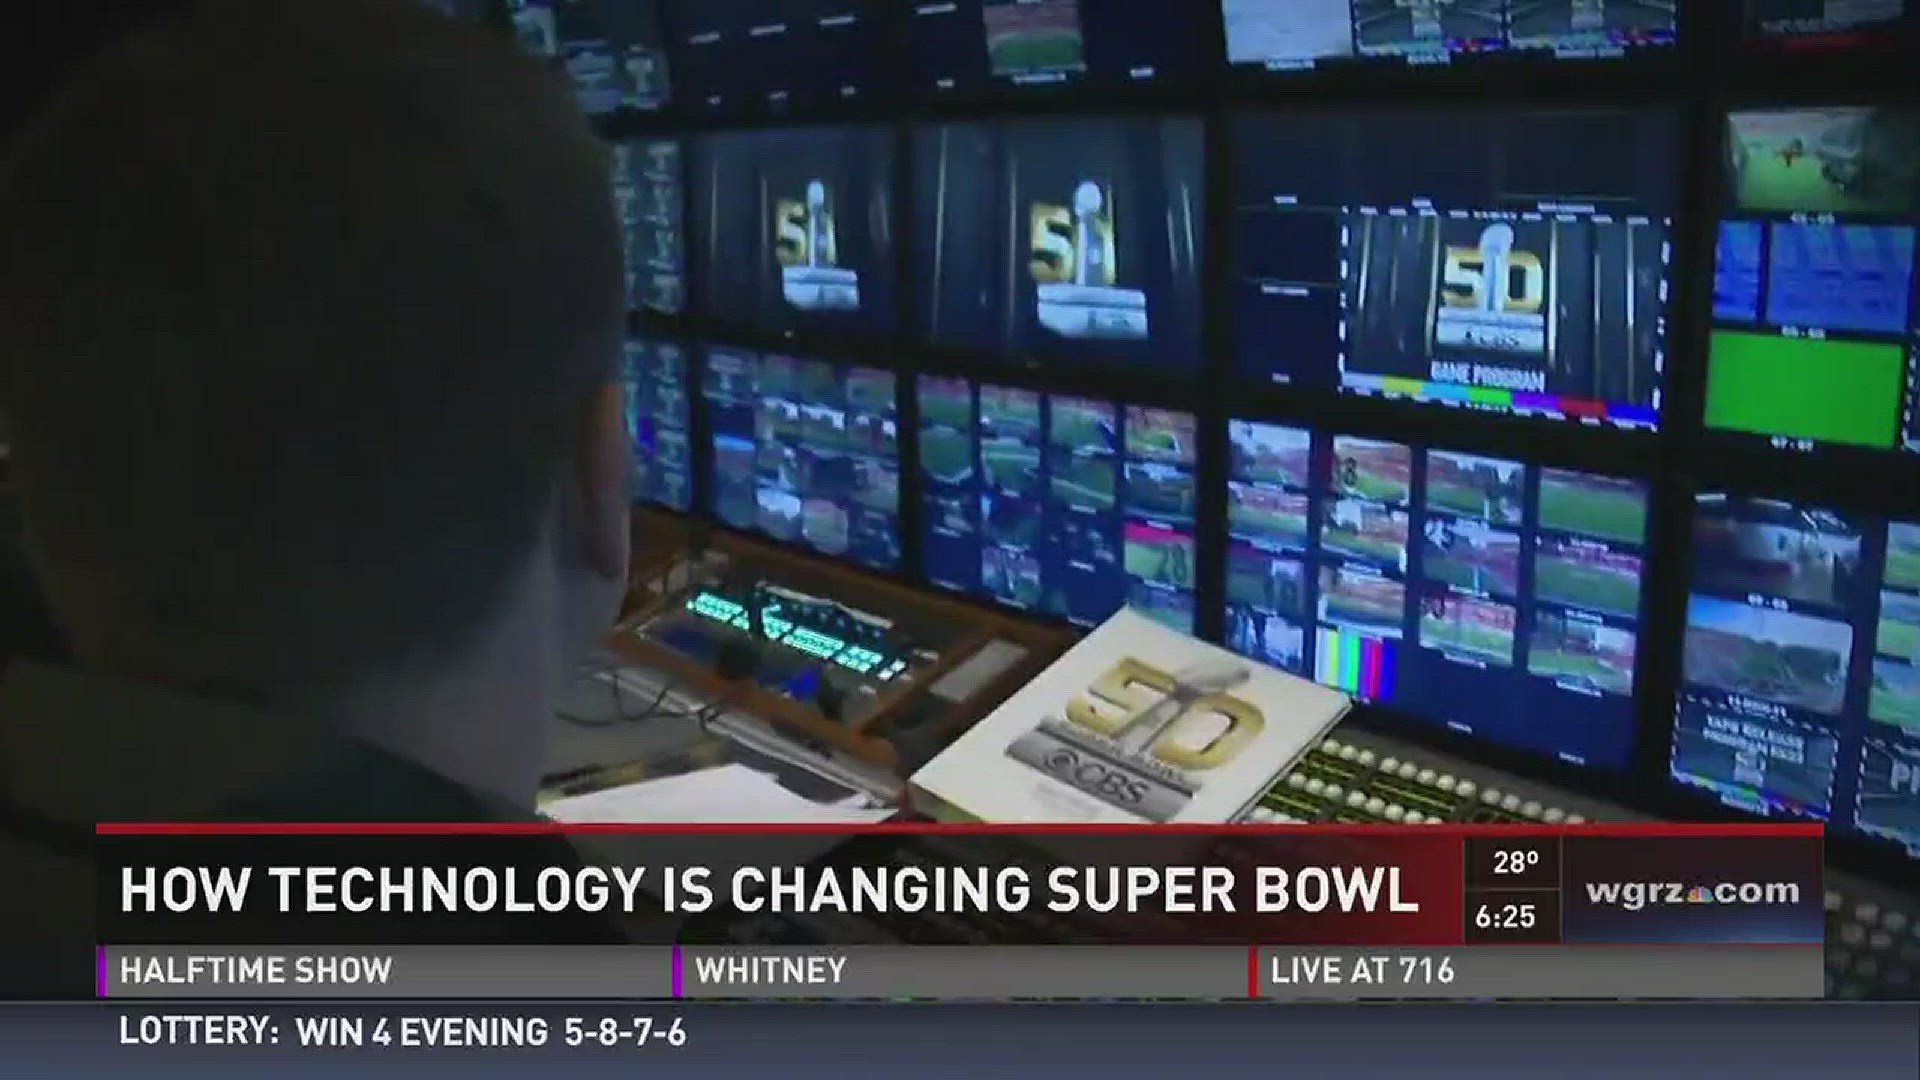 How technology is changing the Super Bowl